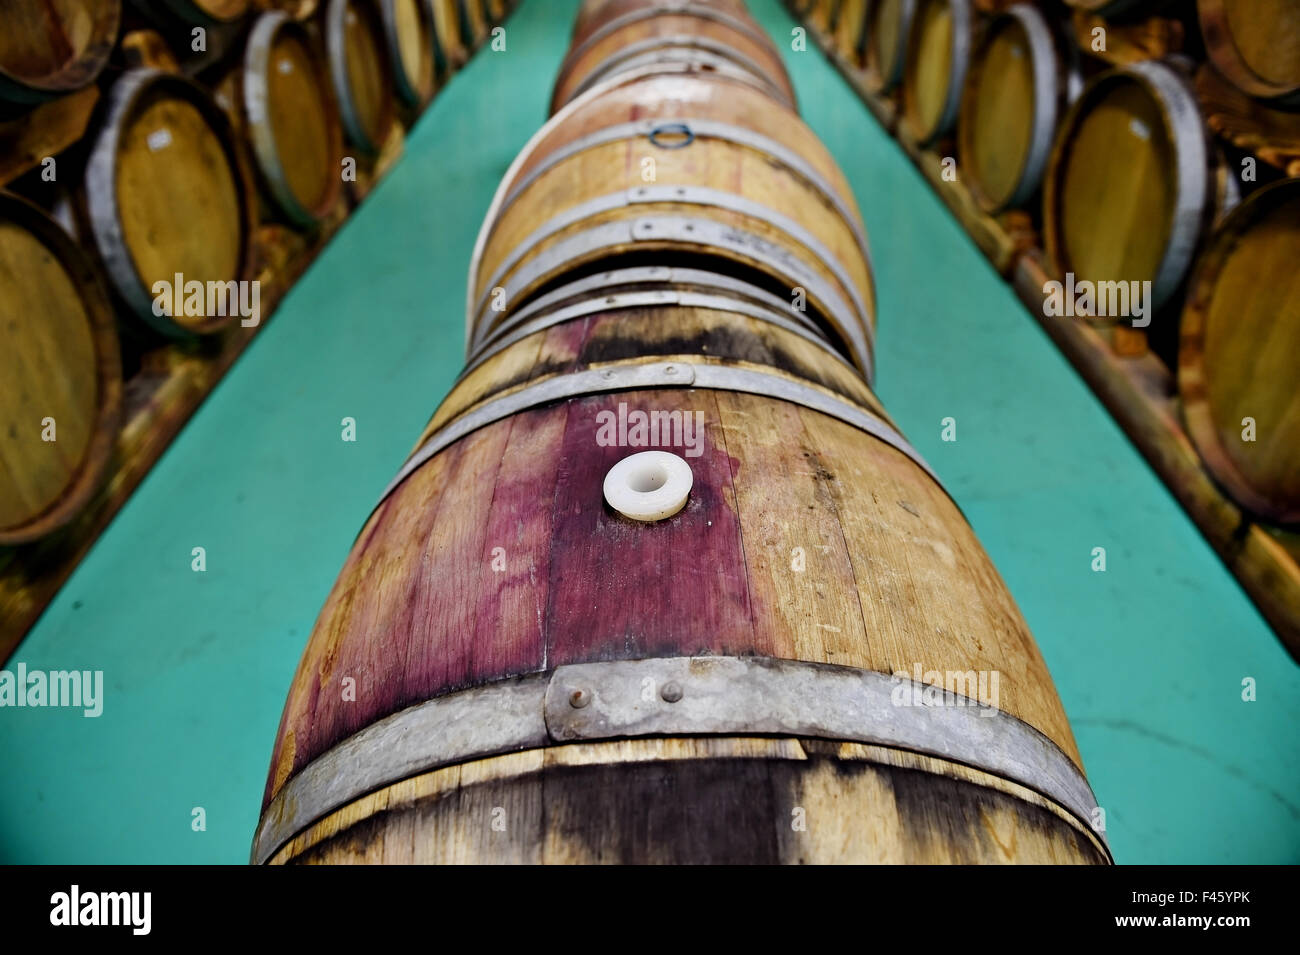 Industry detail with several wooden wine barrels in a wine cellar Stock Photo